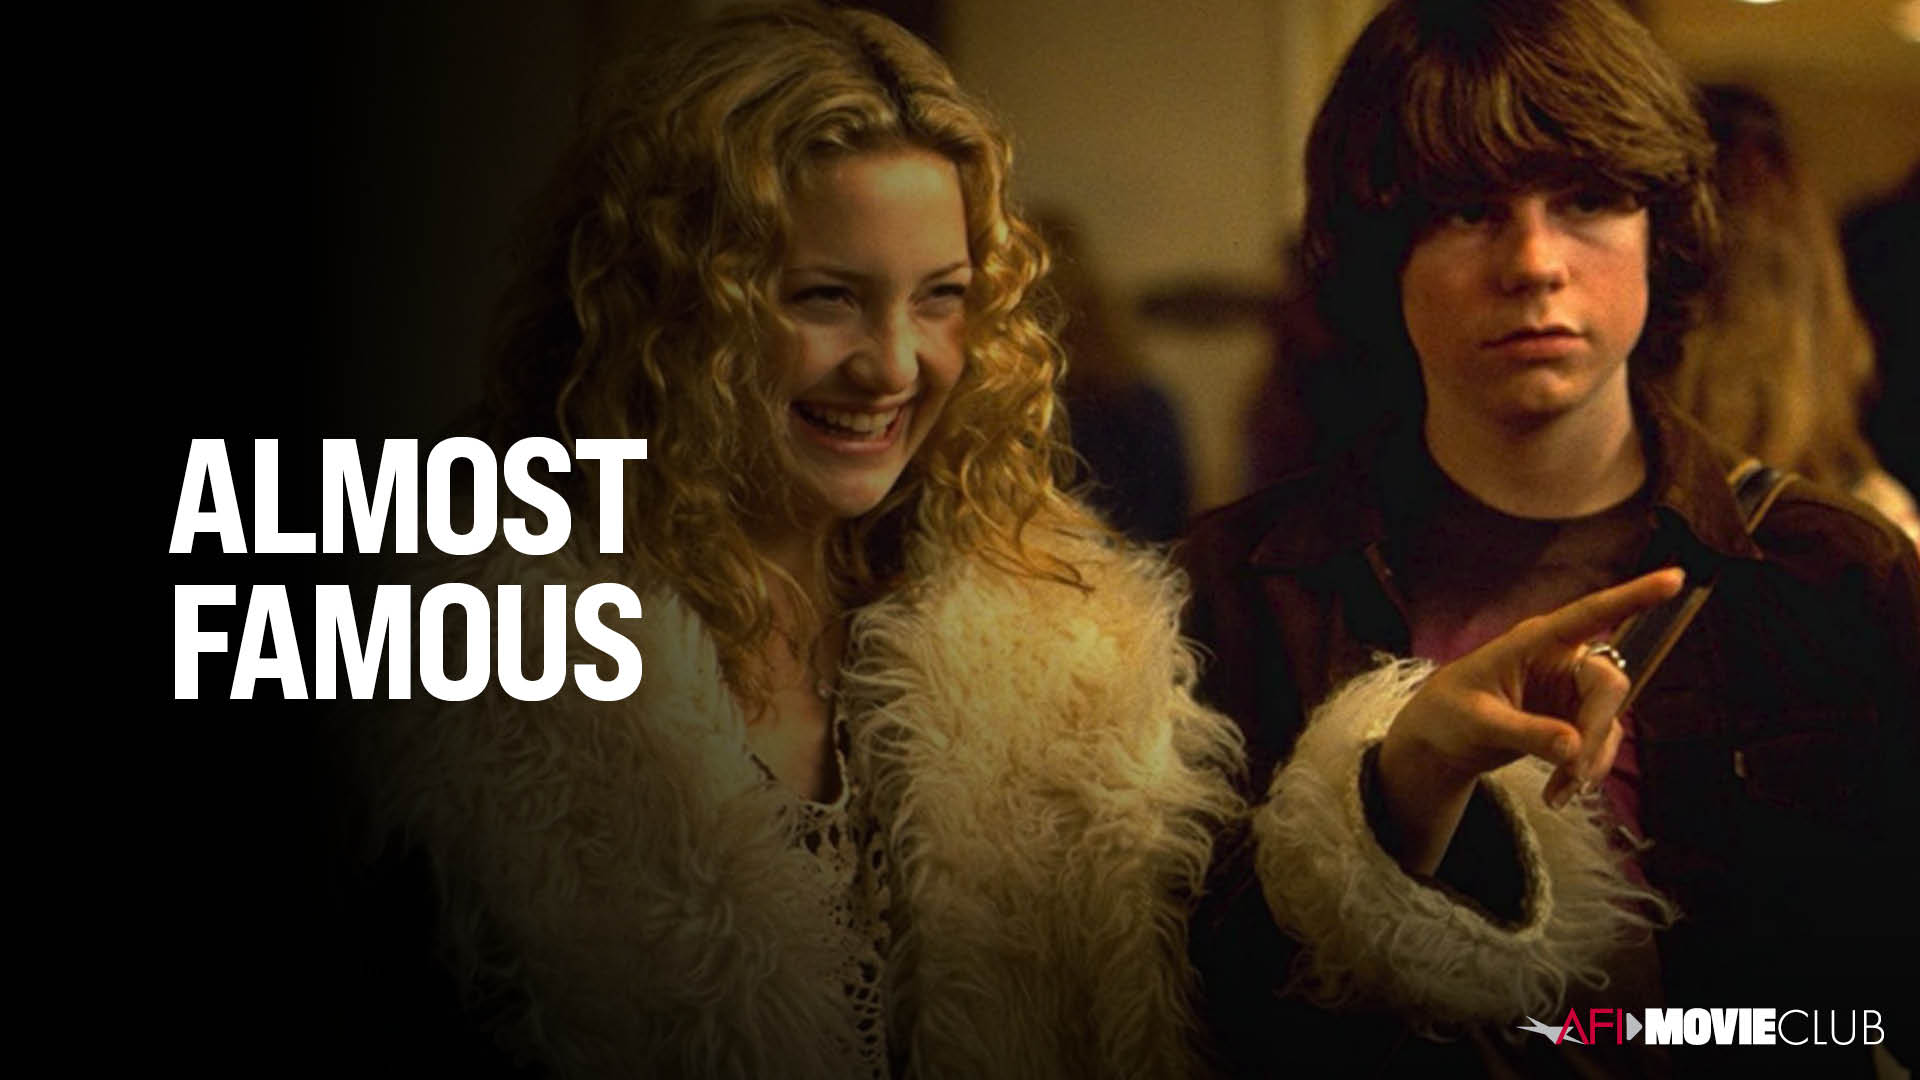 Almost Famous Film Still - Kate Hudson and Patrick Fugit